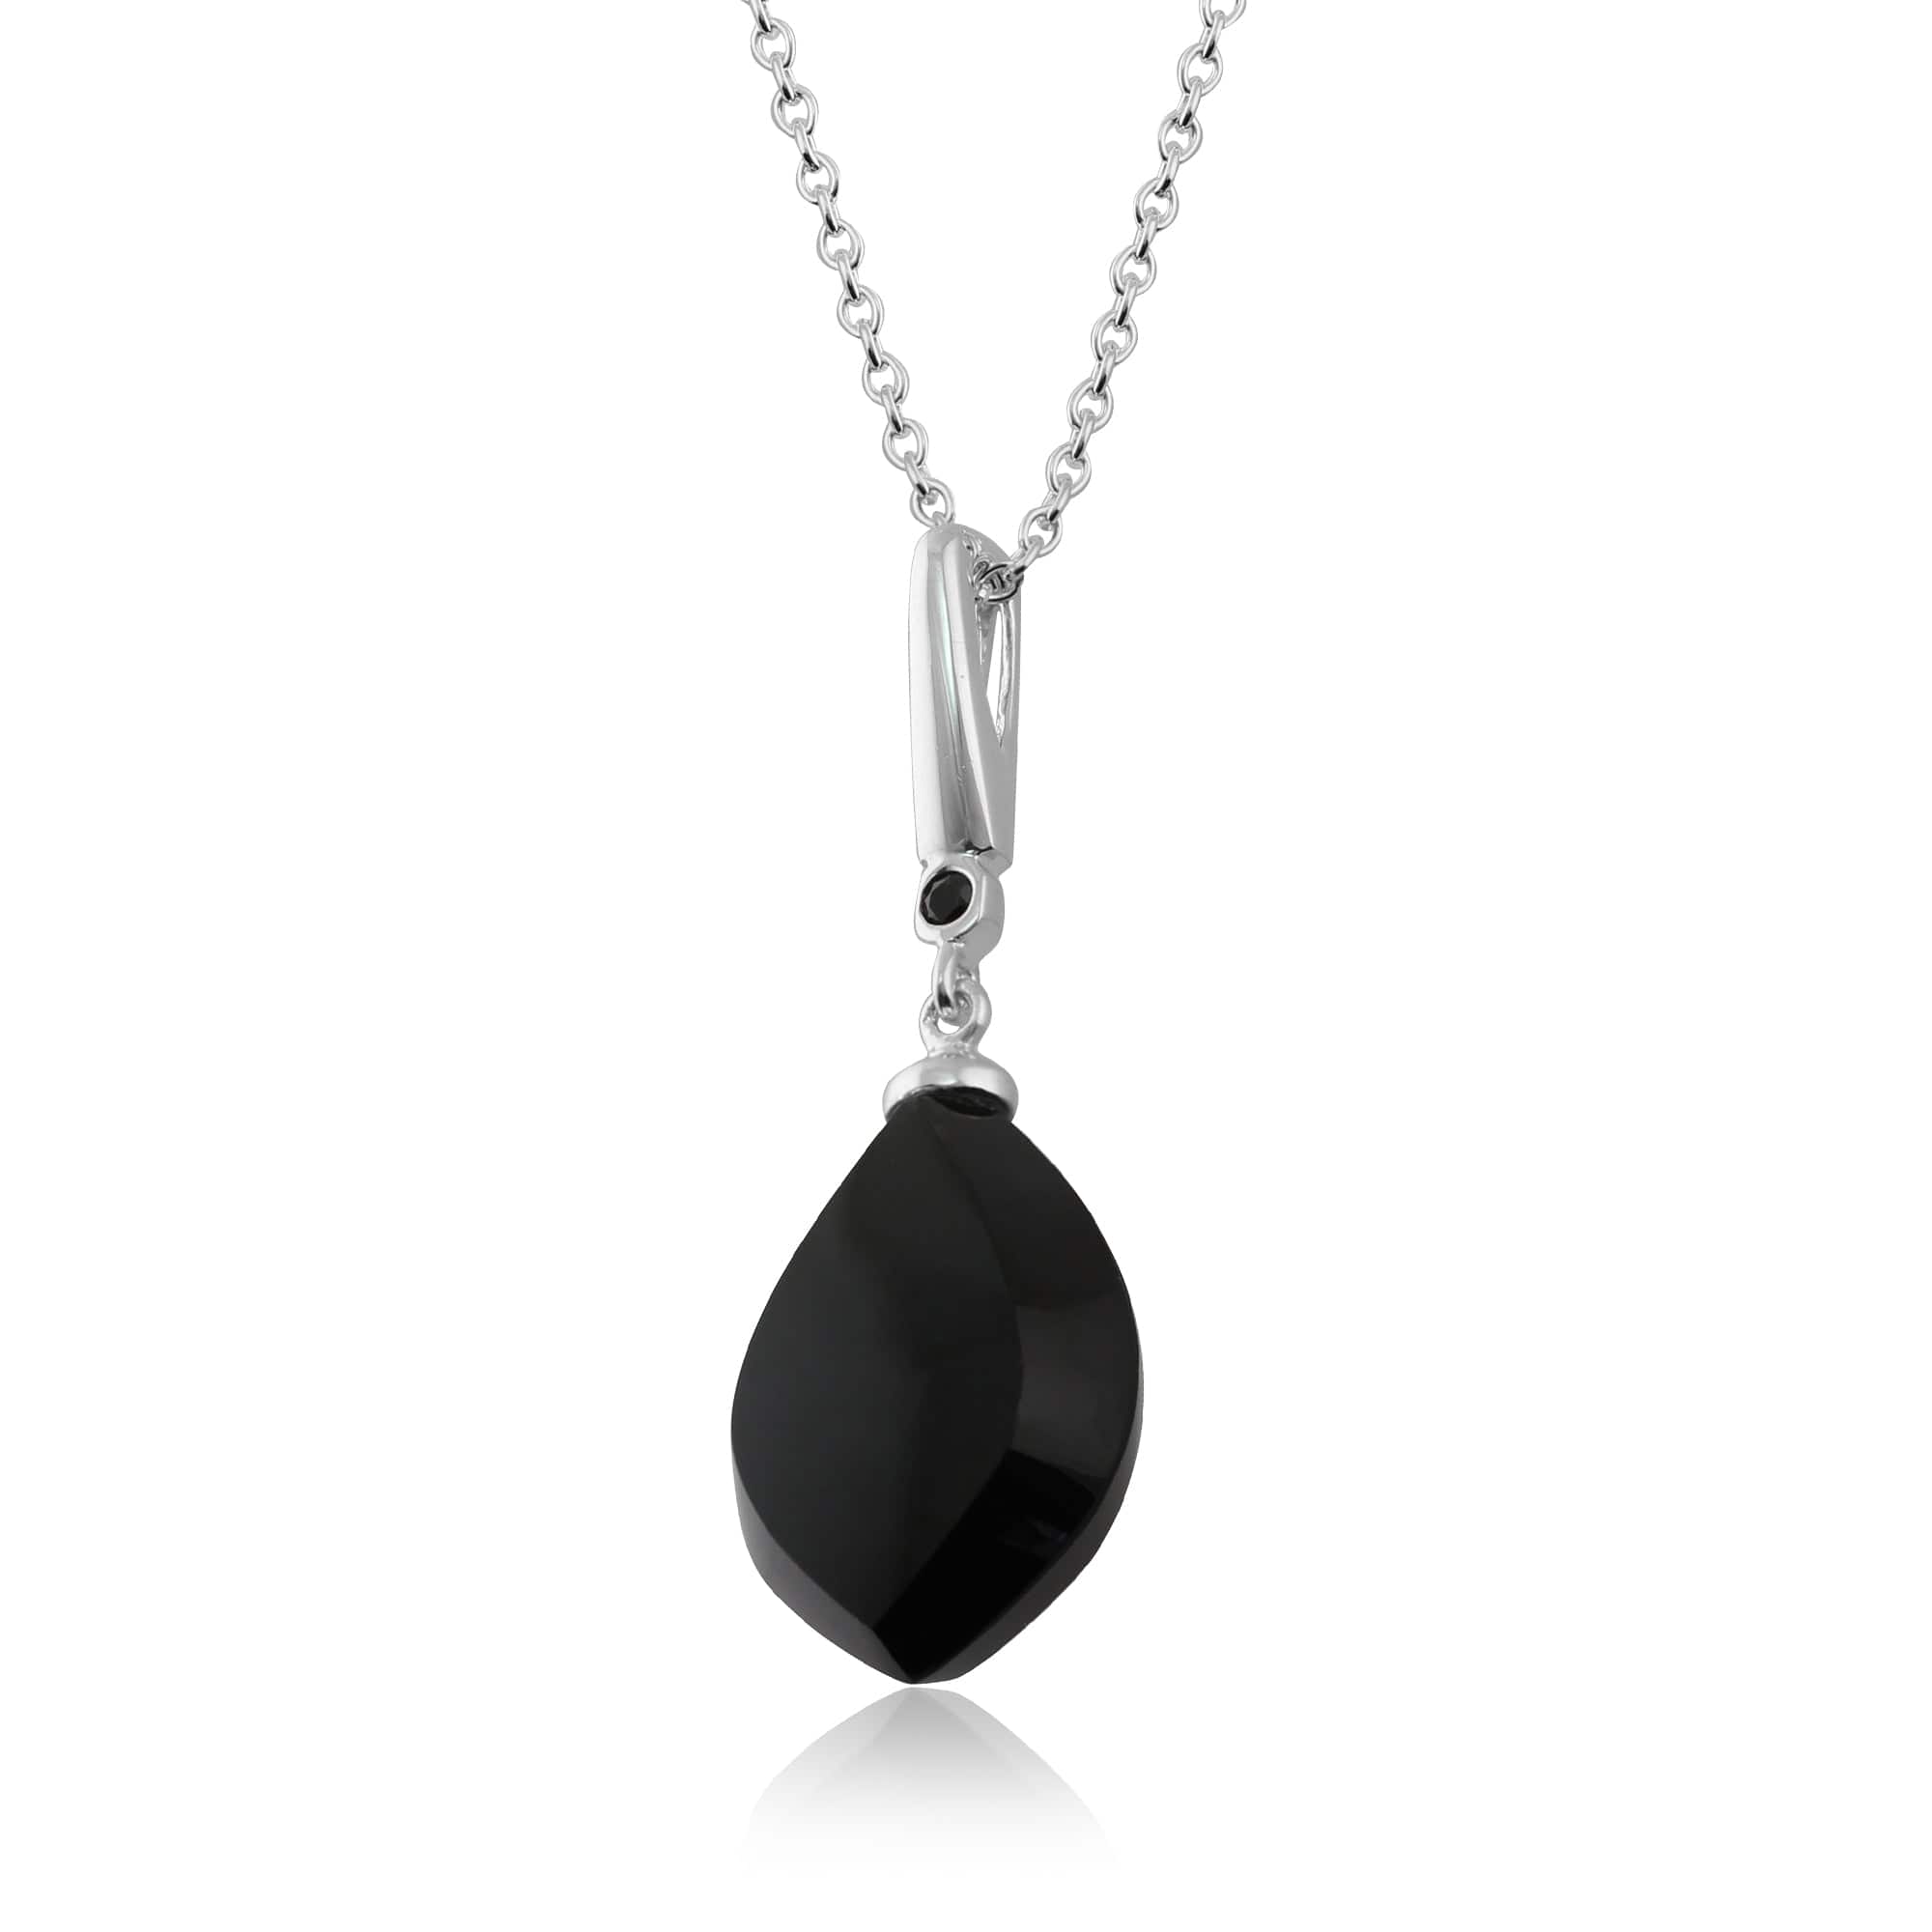 260N143903925 Art Deco Style Black Onyx Cabochon & Black Spinel Pendant in Sterling Silver 2